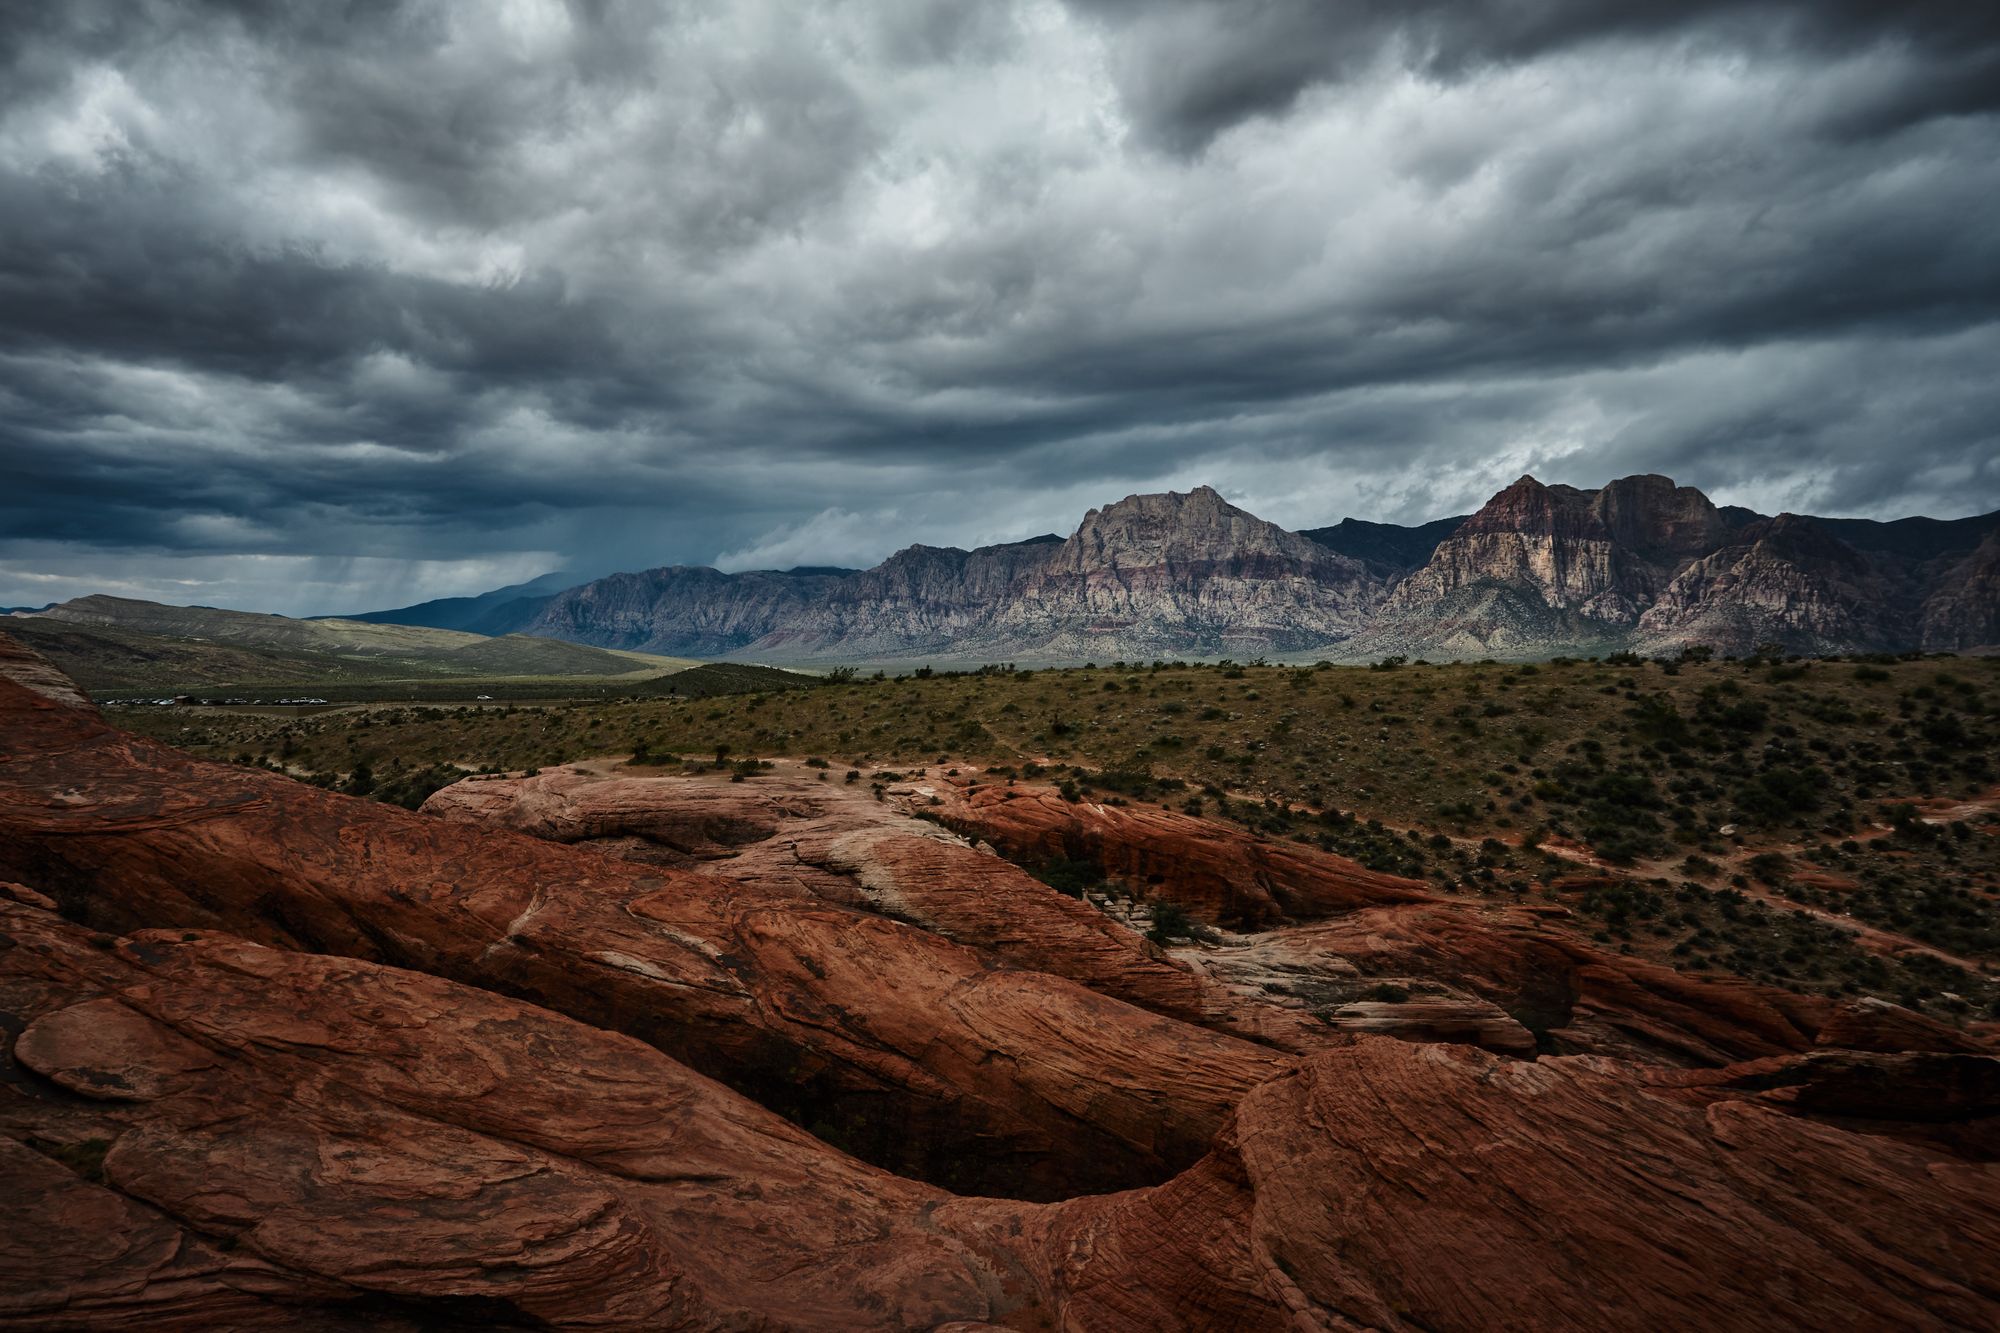 Dramatic storm clouds seen with red rocks canyons in the distance.